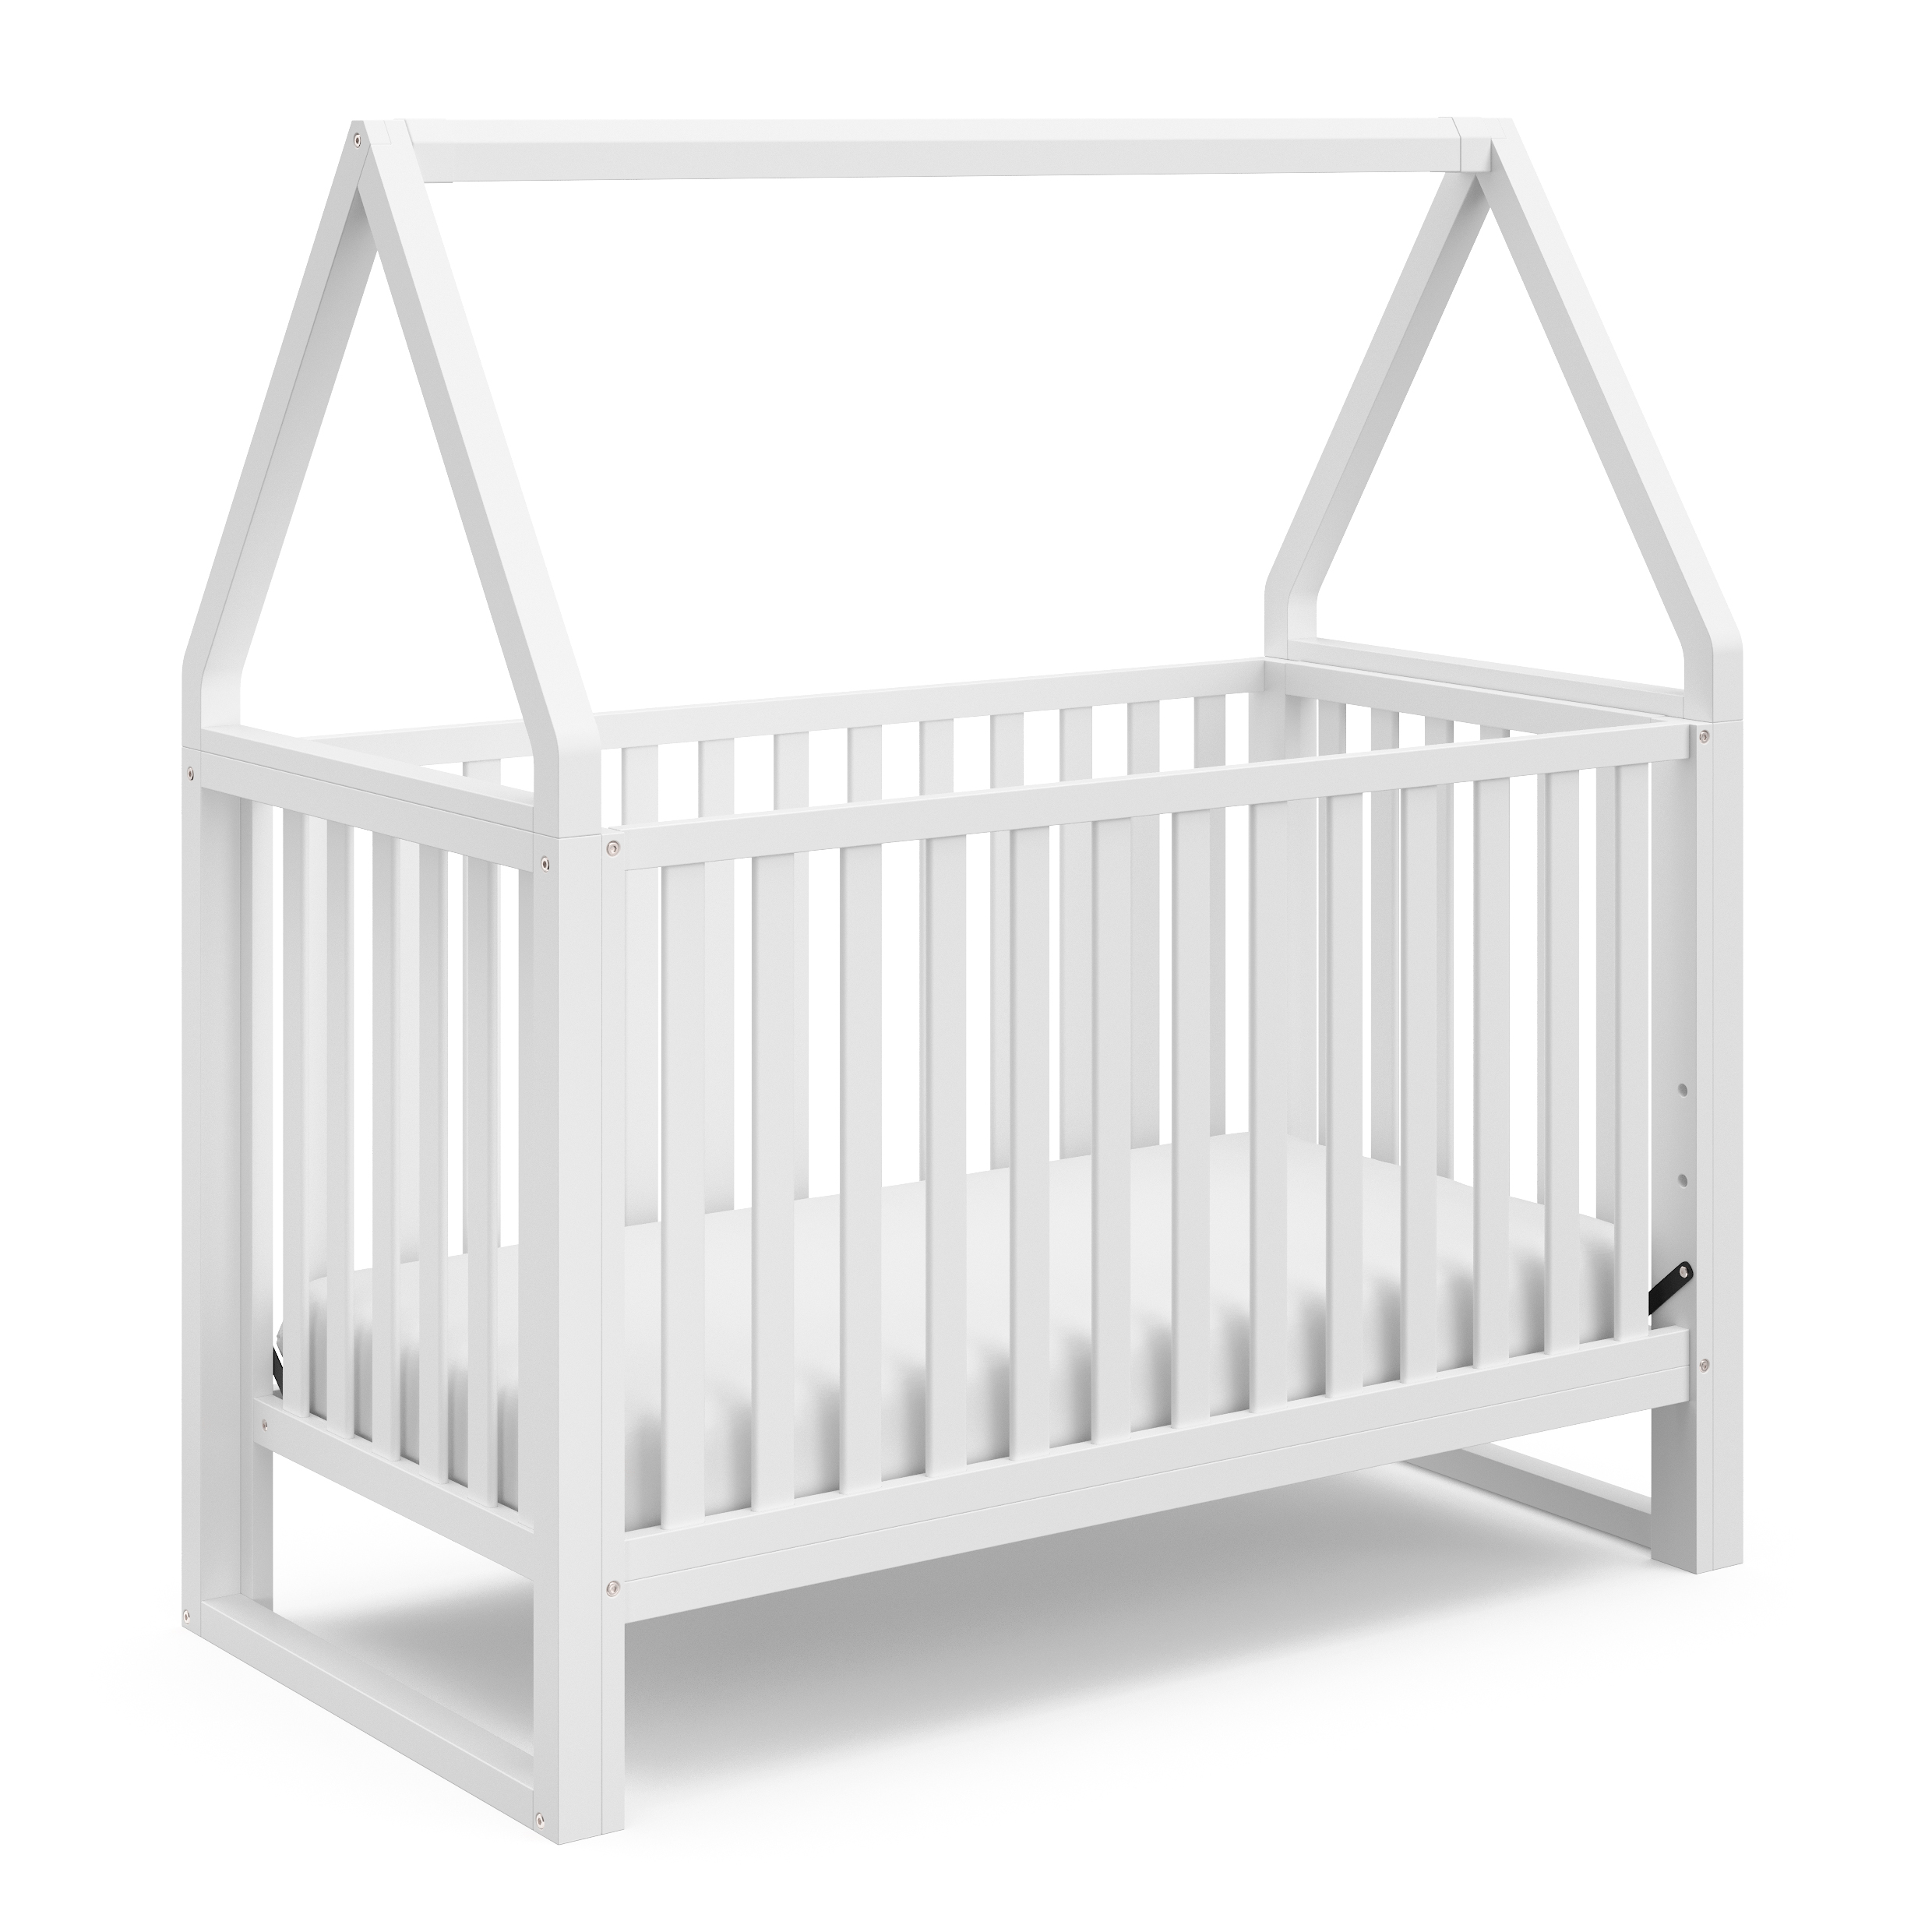 Storkcraft Orchard 5-in-1 Convertible Baby Crib, White - image 1 of 17